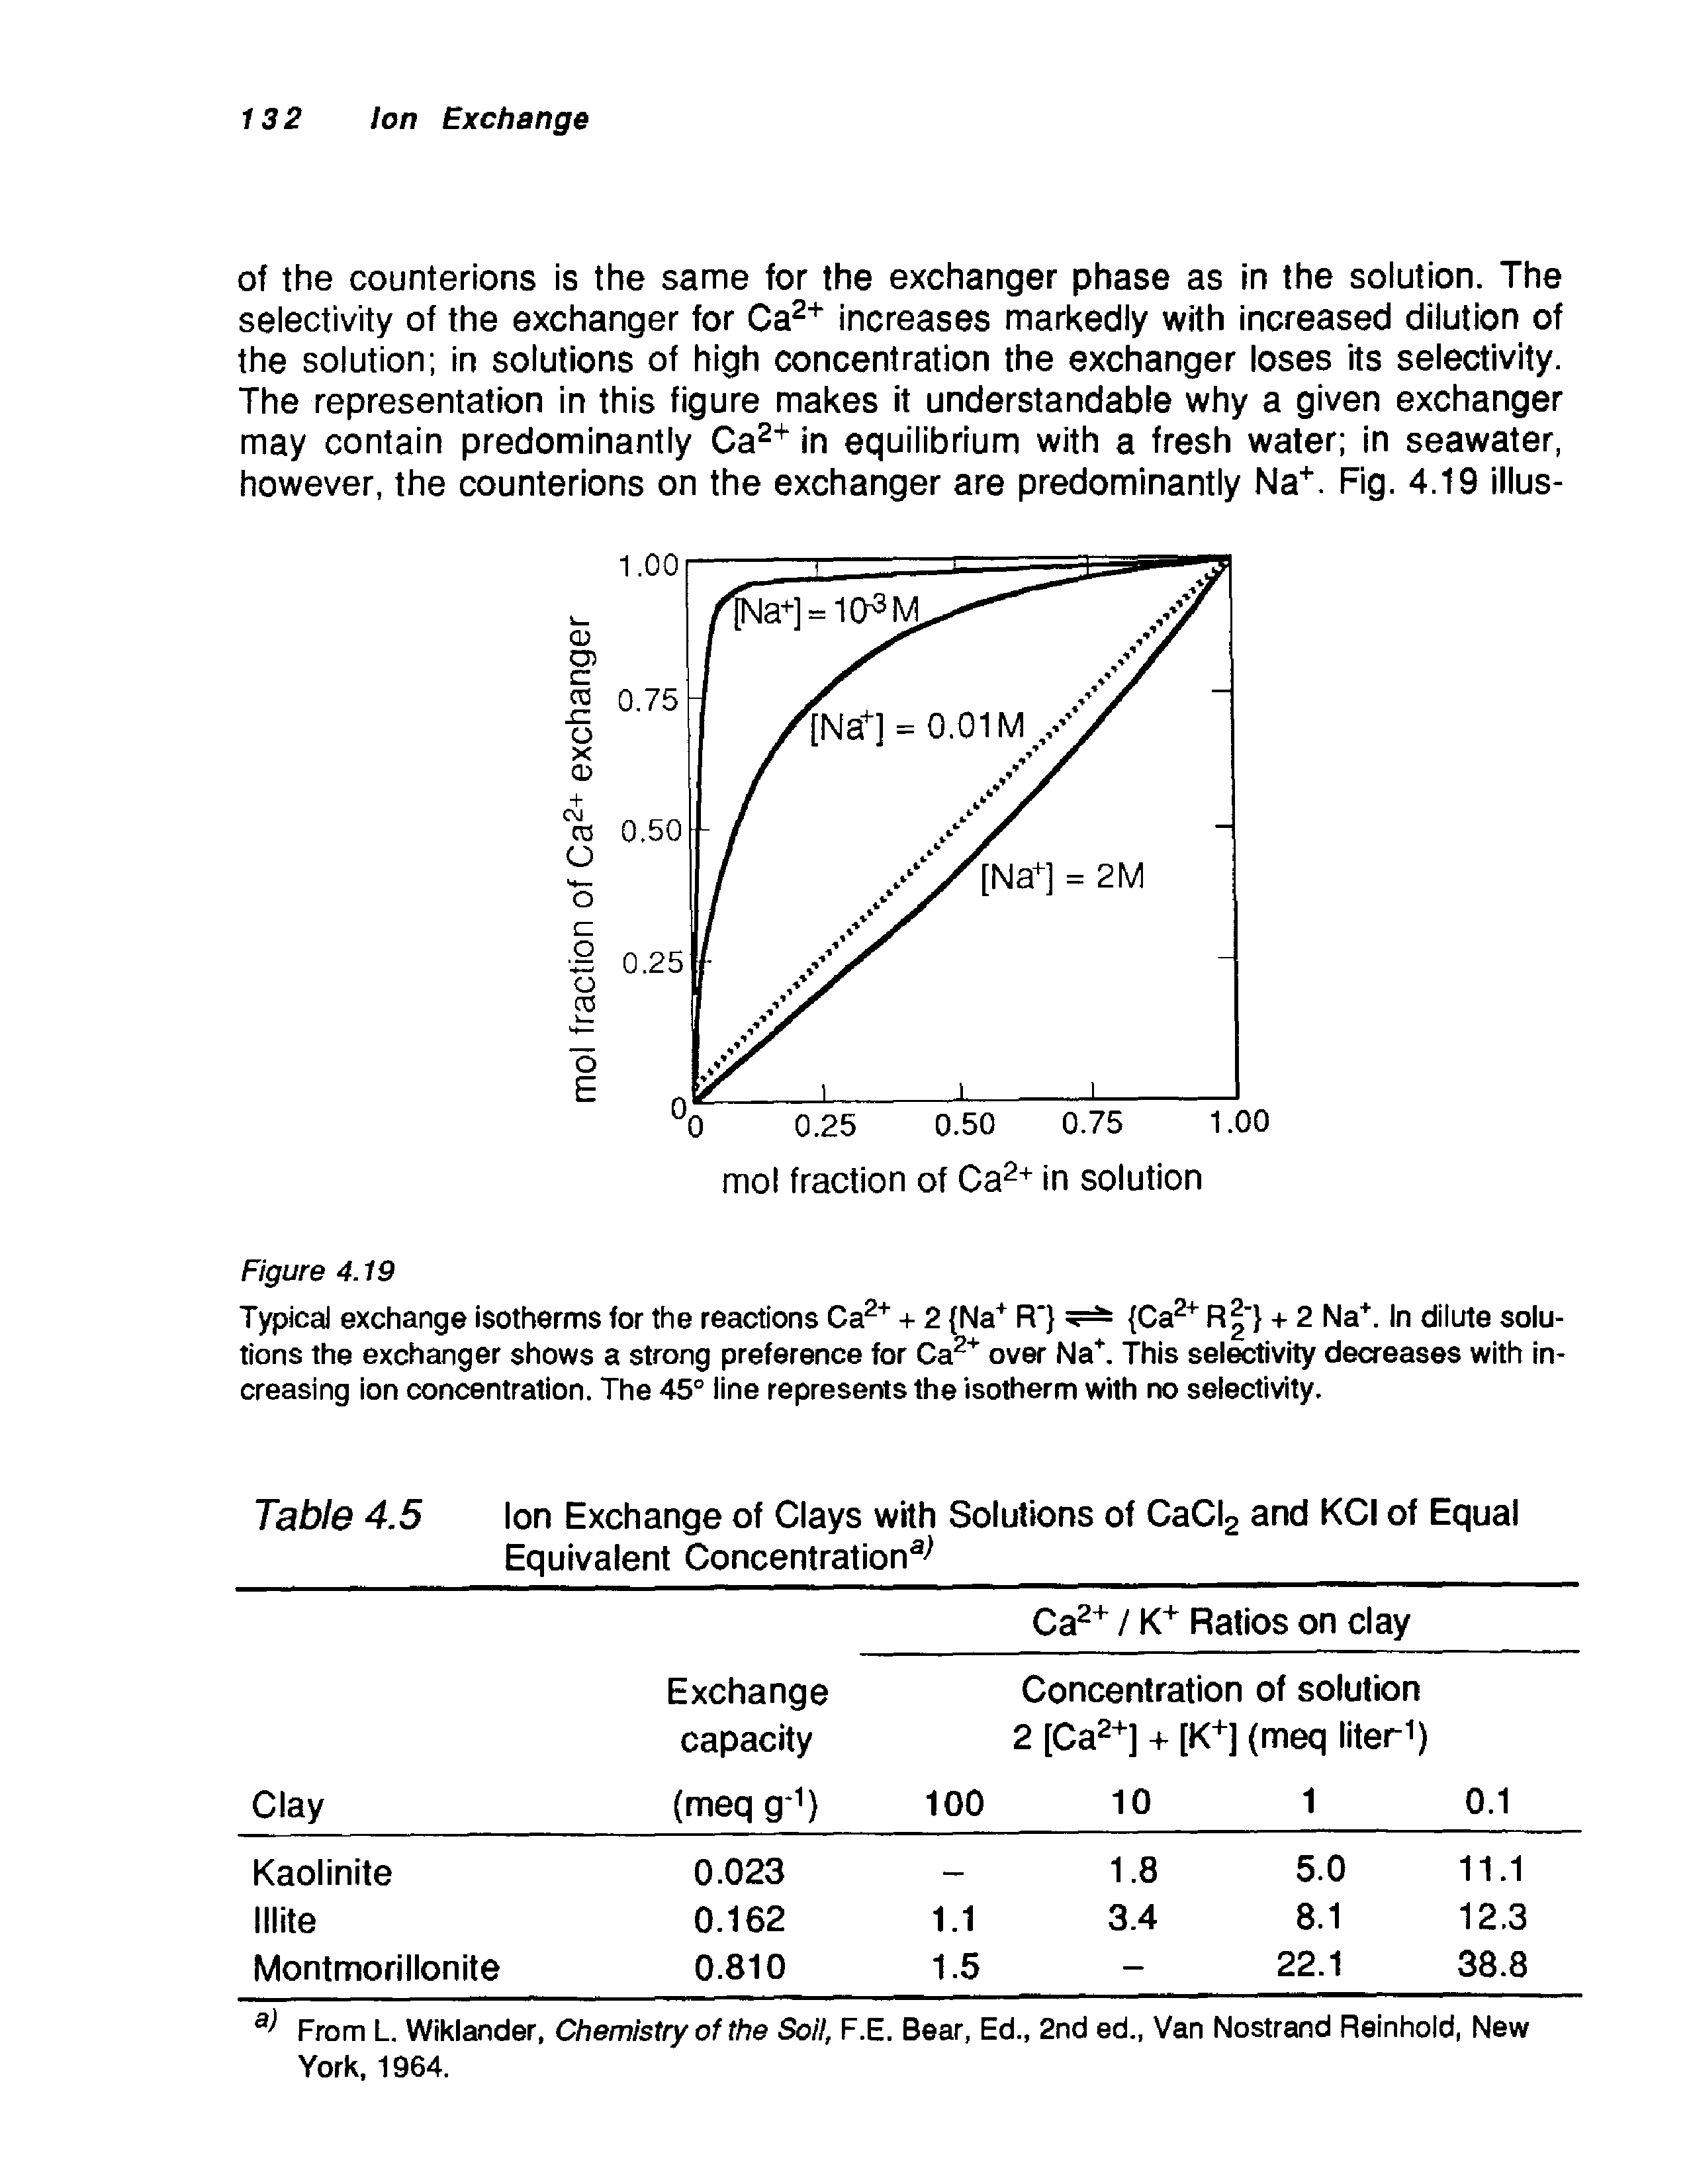 Table 4.5 Ion Exchange of Clays with Solutions of CaCI2 and KCI of Equal Equivalent Concentration3 ...